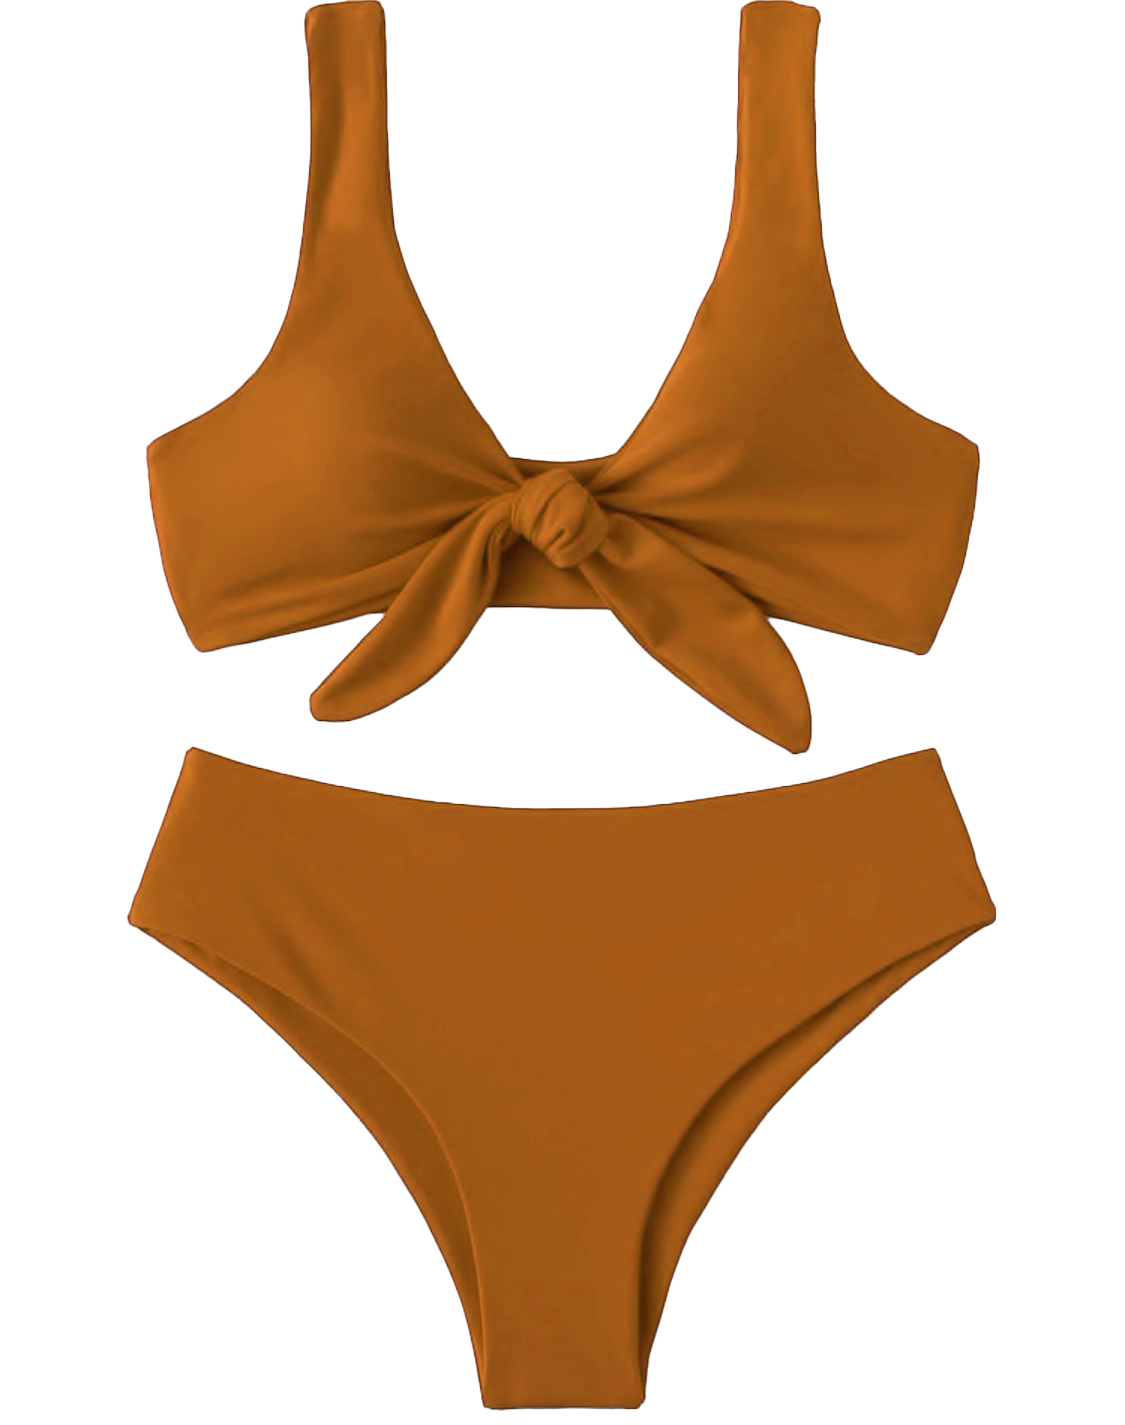 product with independent sizes (ex: bikini)